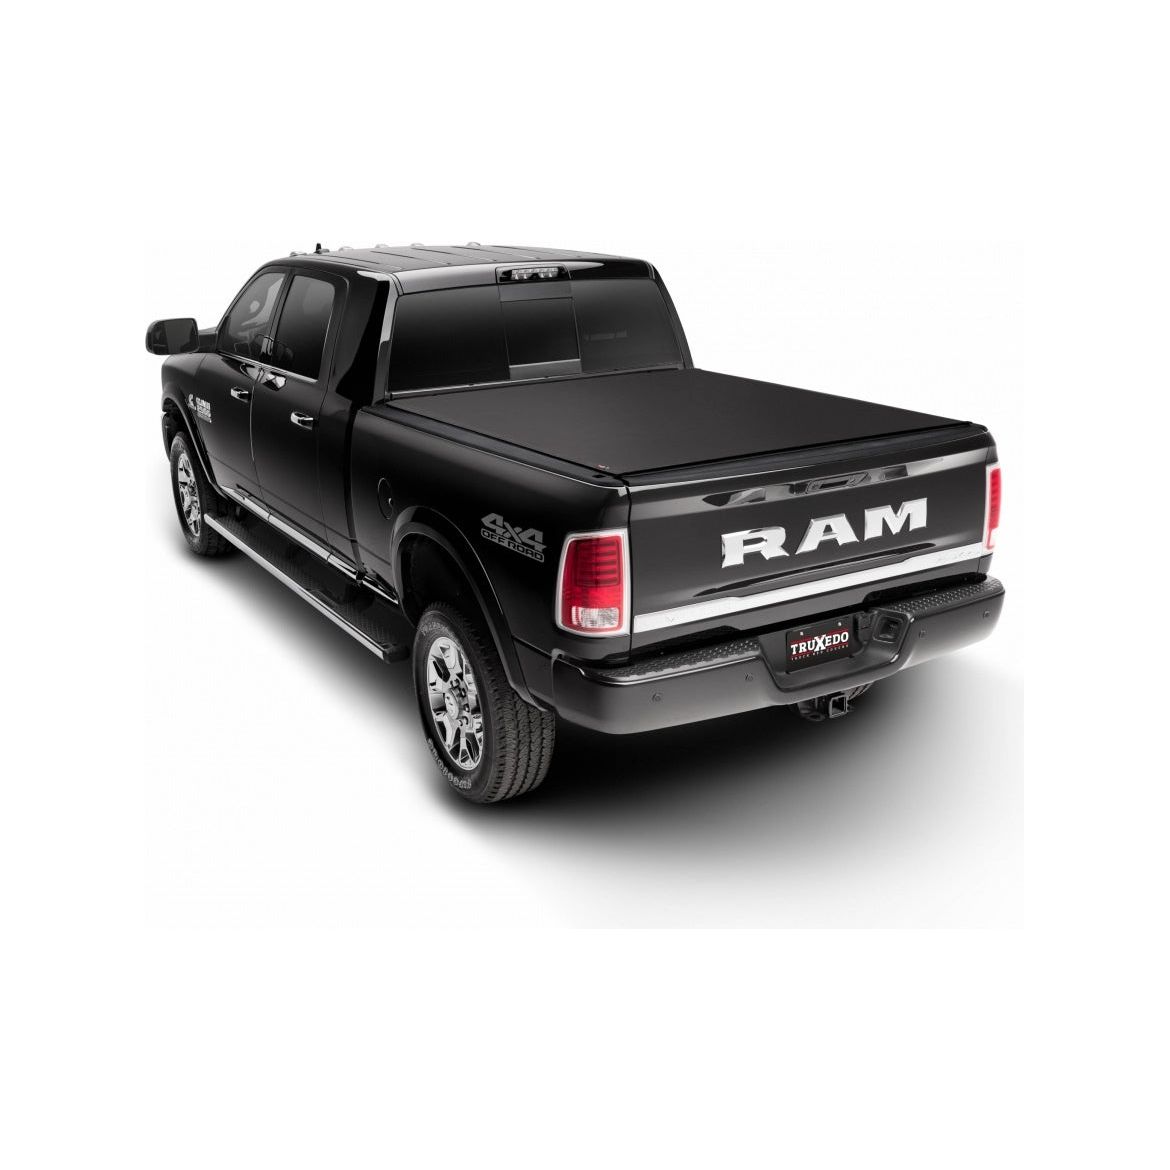 TRUXEDO 1445901 - Pro X15 Bed Cover 09-17 Dodge Ram 1500 5.7' Bed